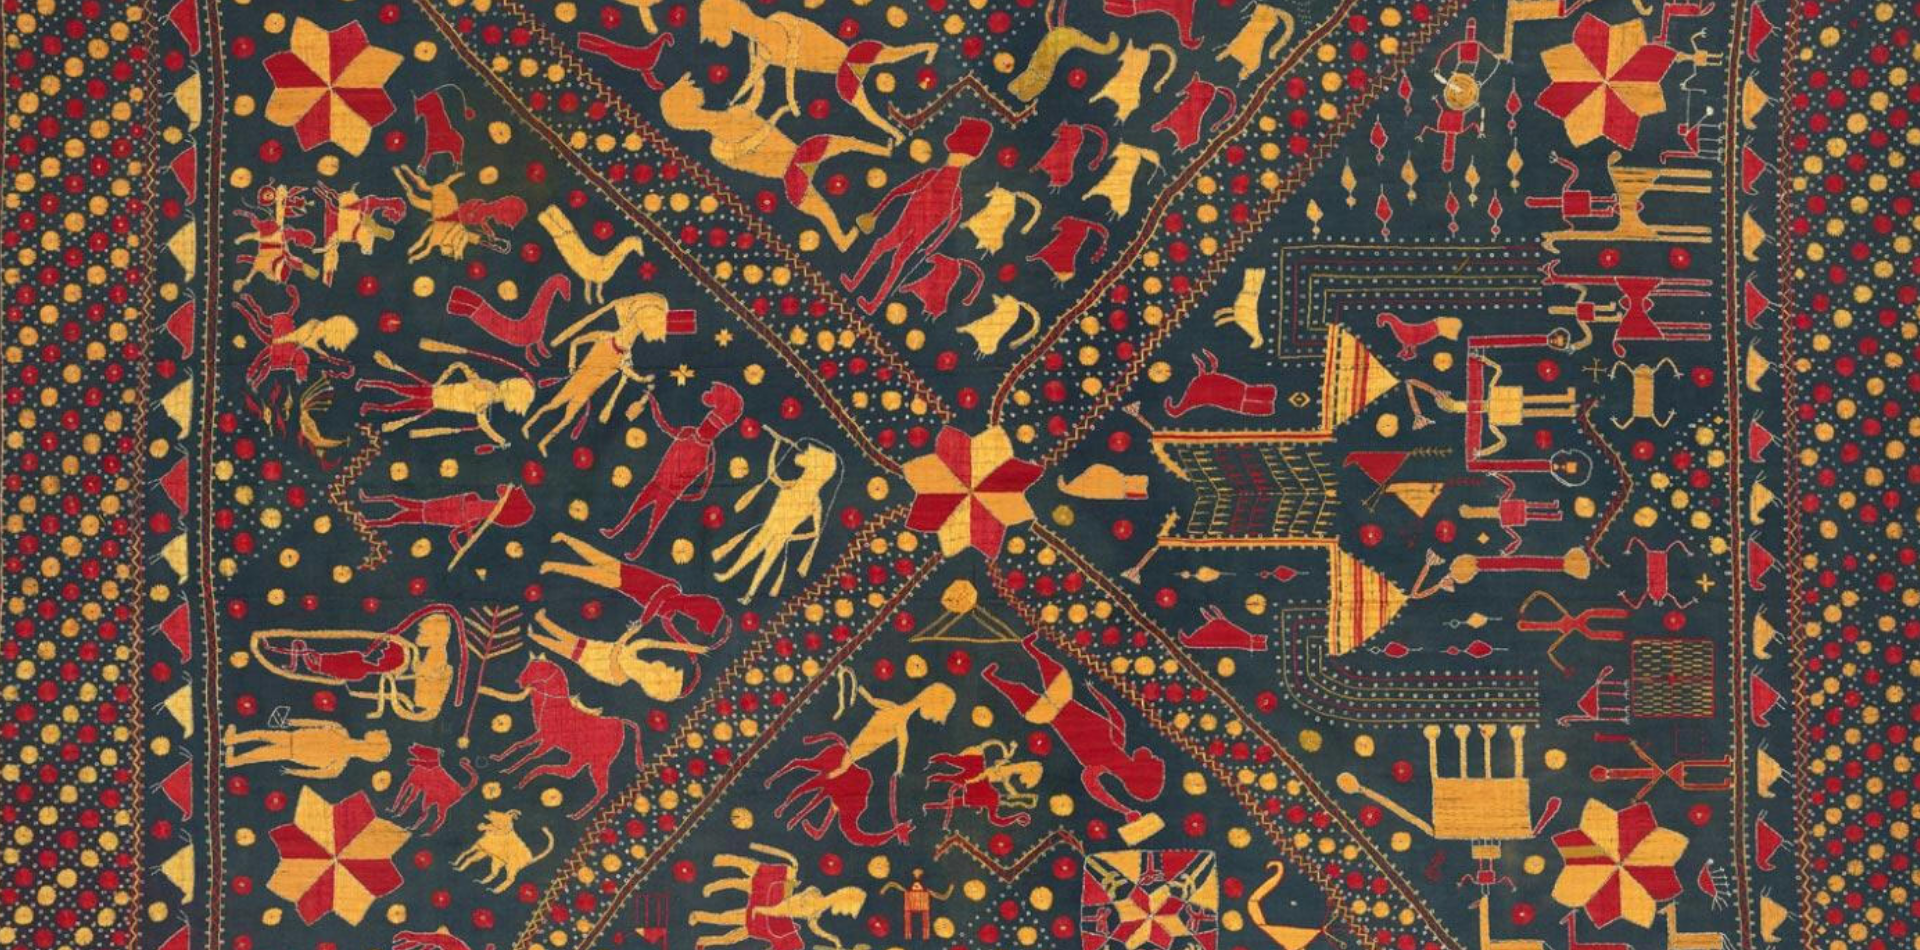 An embroidered shawl from Punjab depicting a village scene